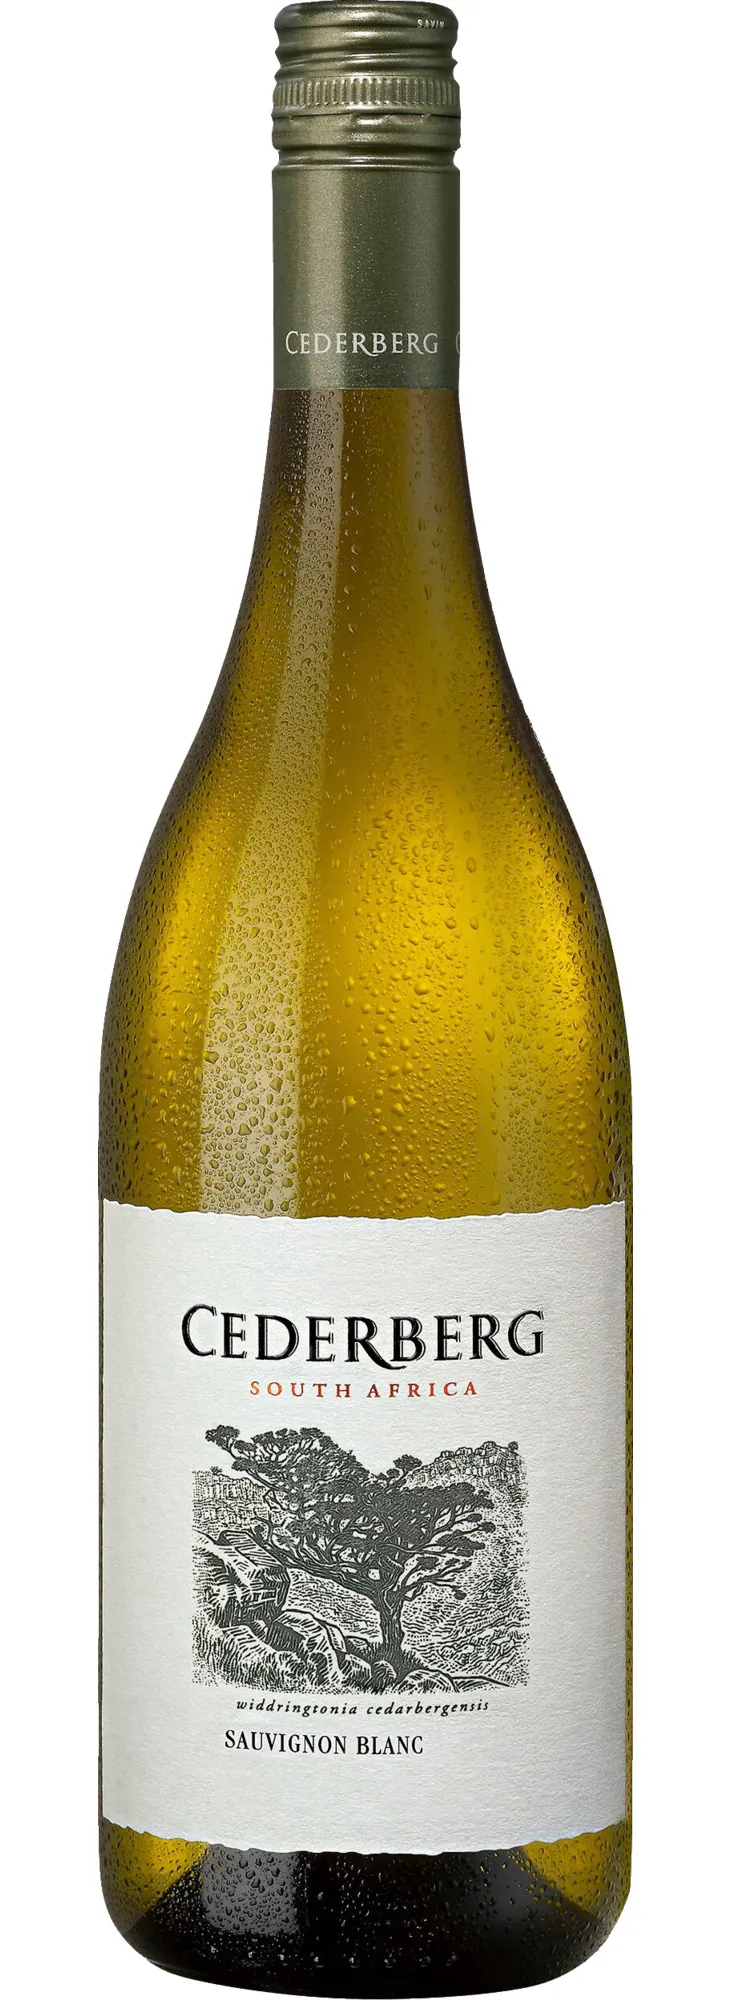 Bottle of Cederberg Sauvignon Blanc from search results